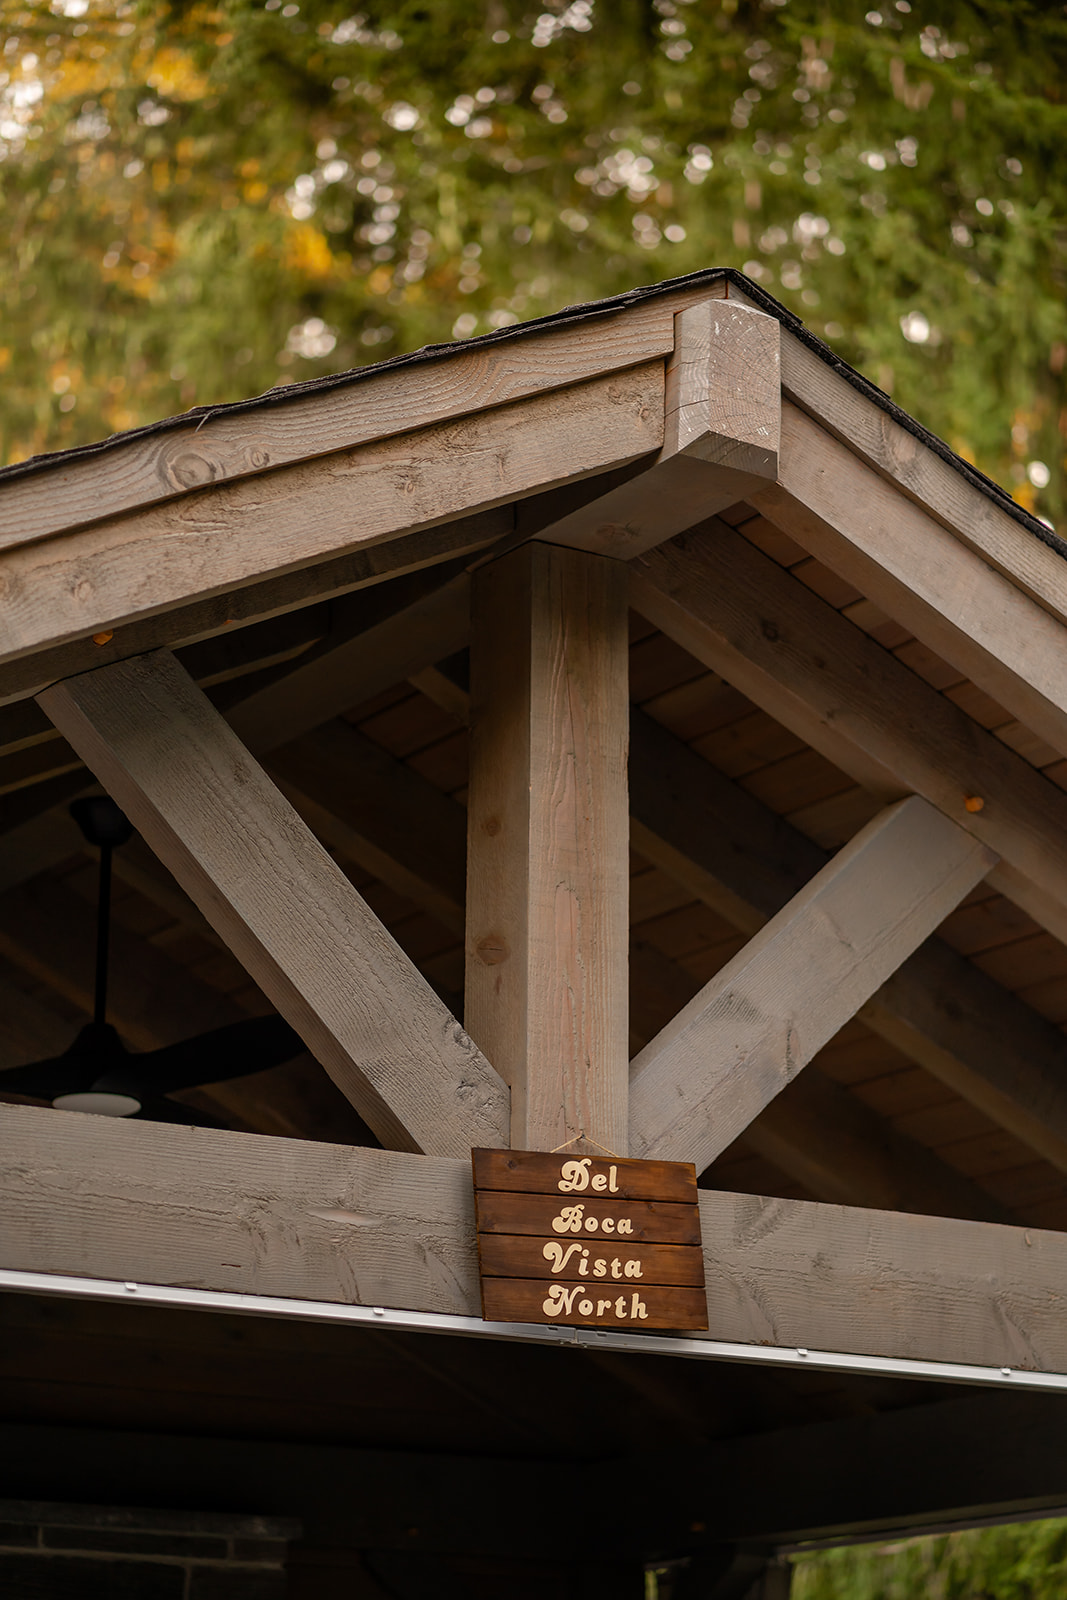 Three wooden pieces attached to the roof of the gazebo.